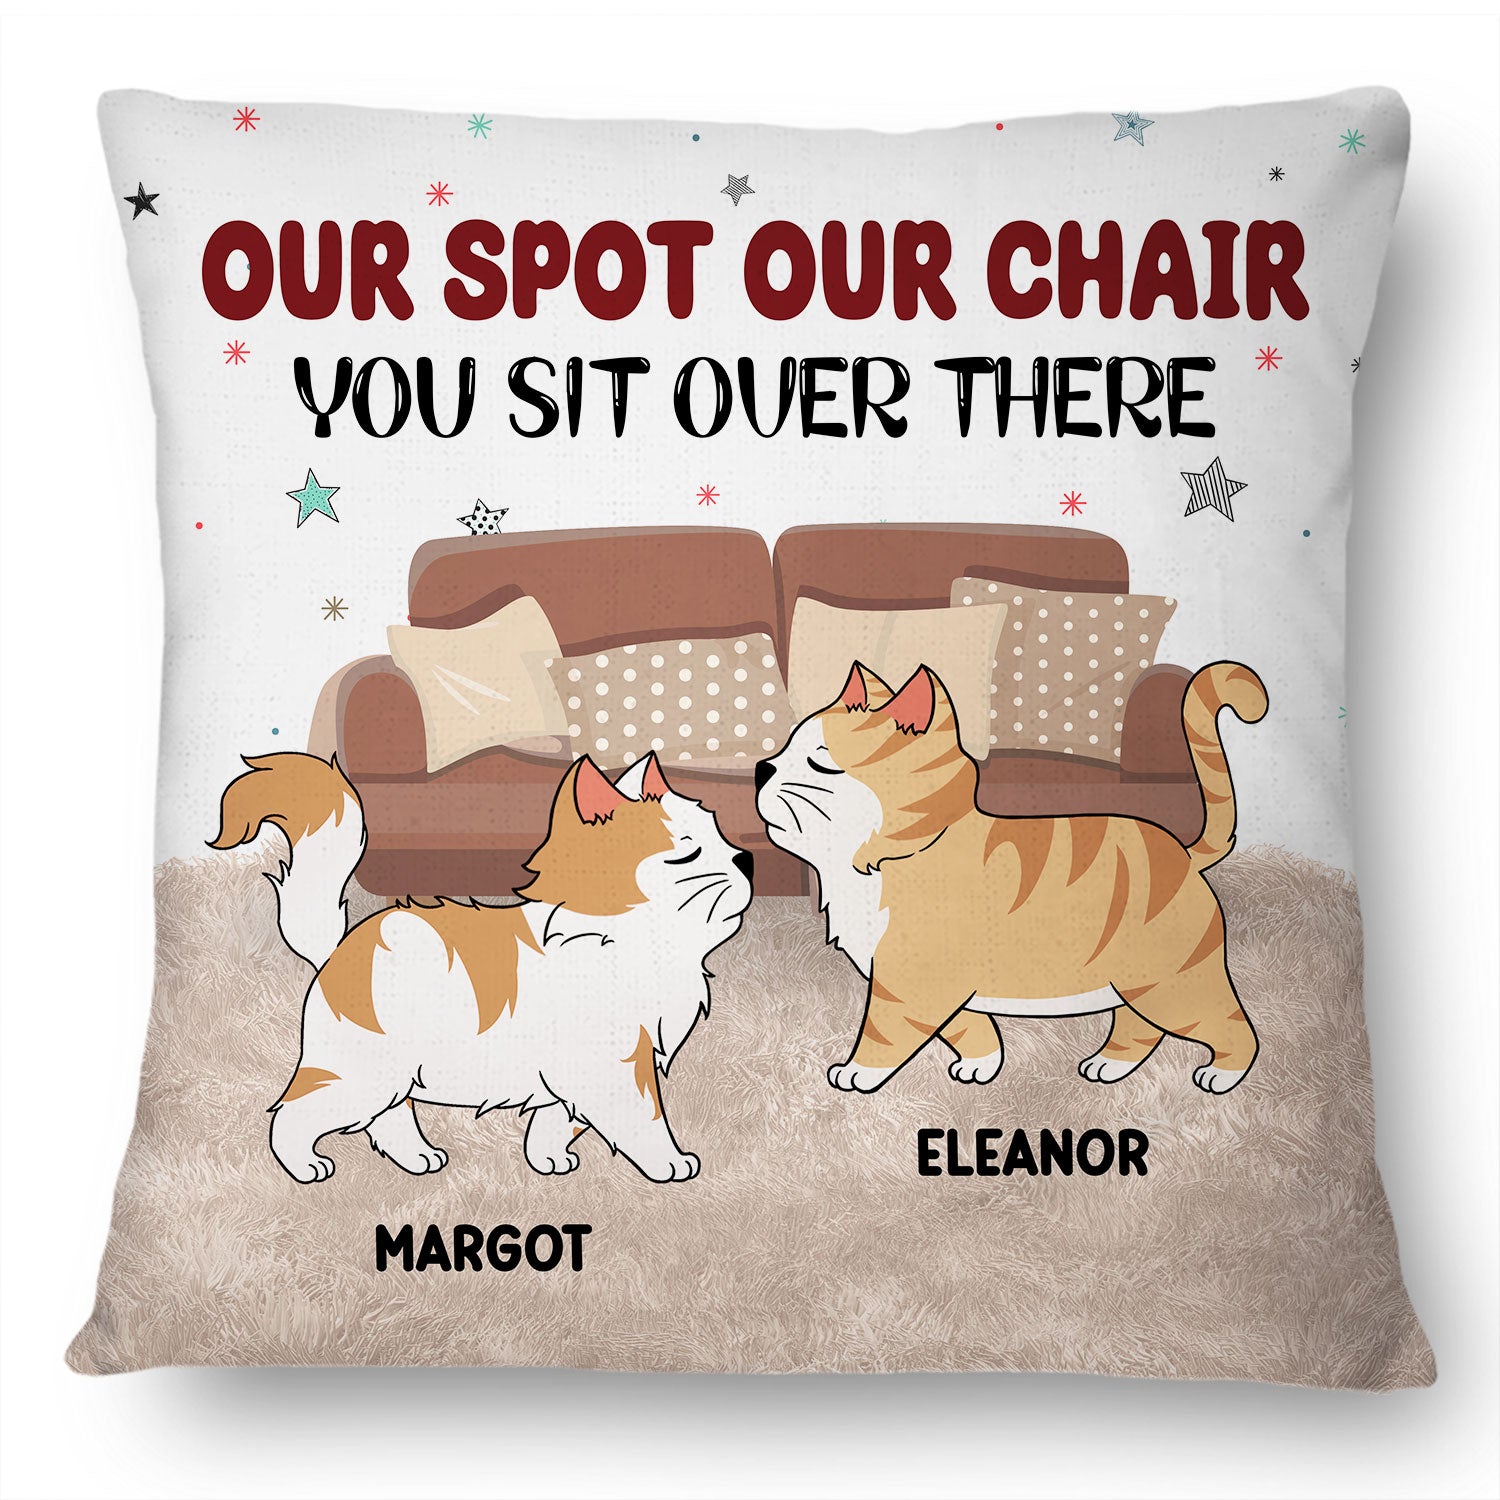 Our Spot Our Chair - Gift For Cat Lovers - Personalized Pillow